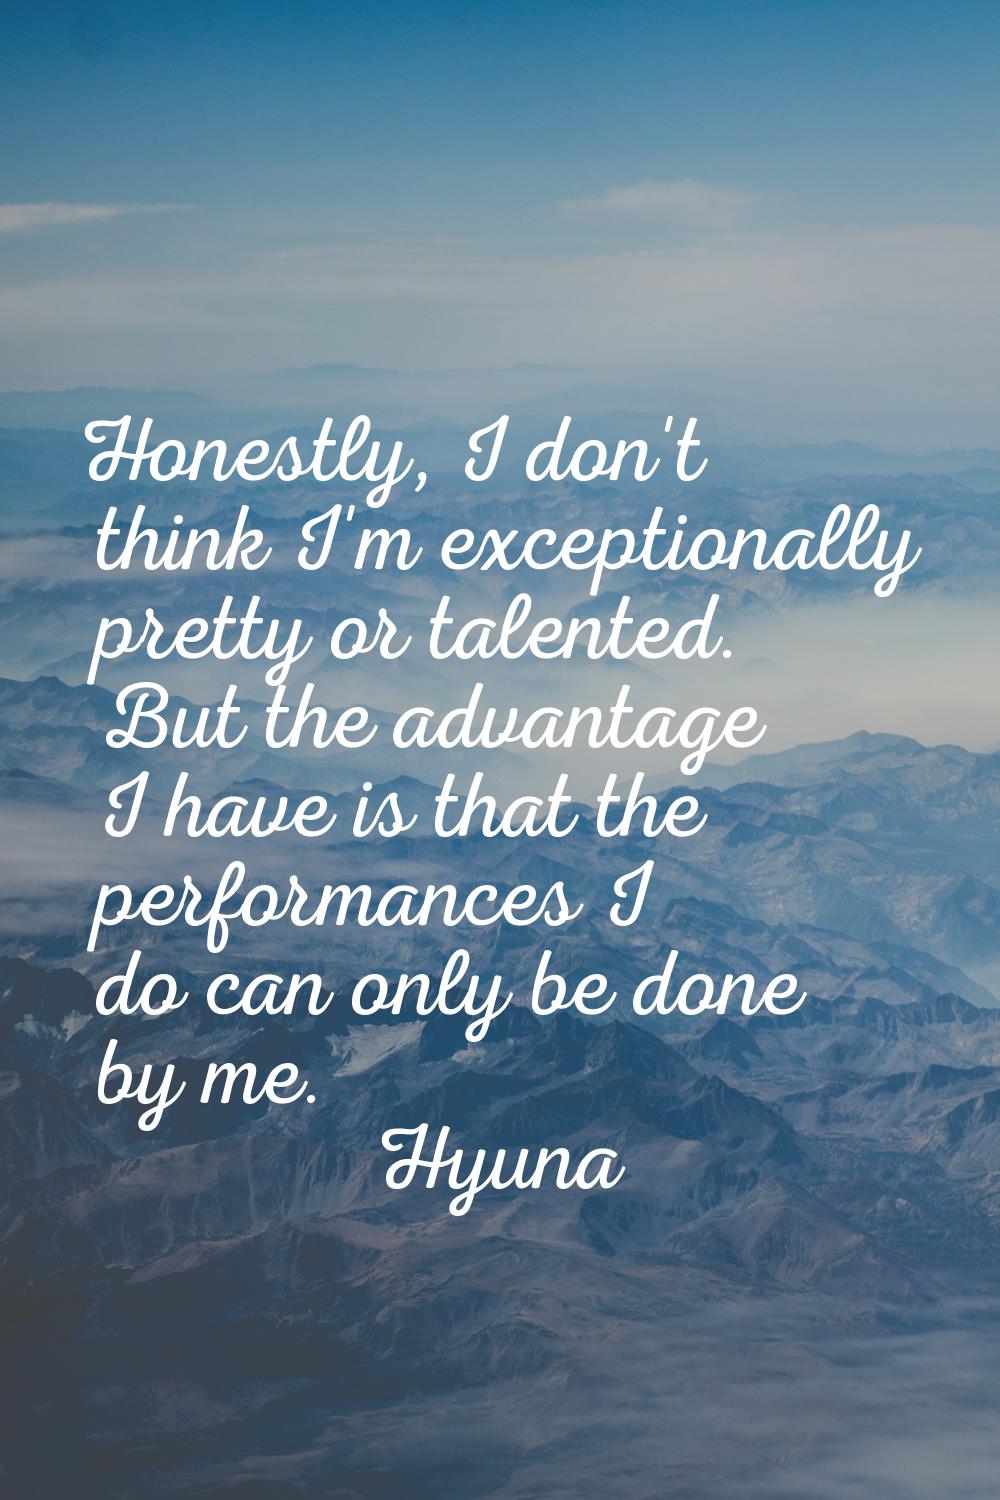 Honestly, I don't think I'm exceptionally pretty or talented. But the advantage I have is that the 